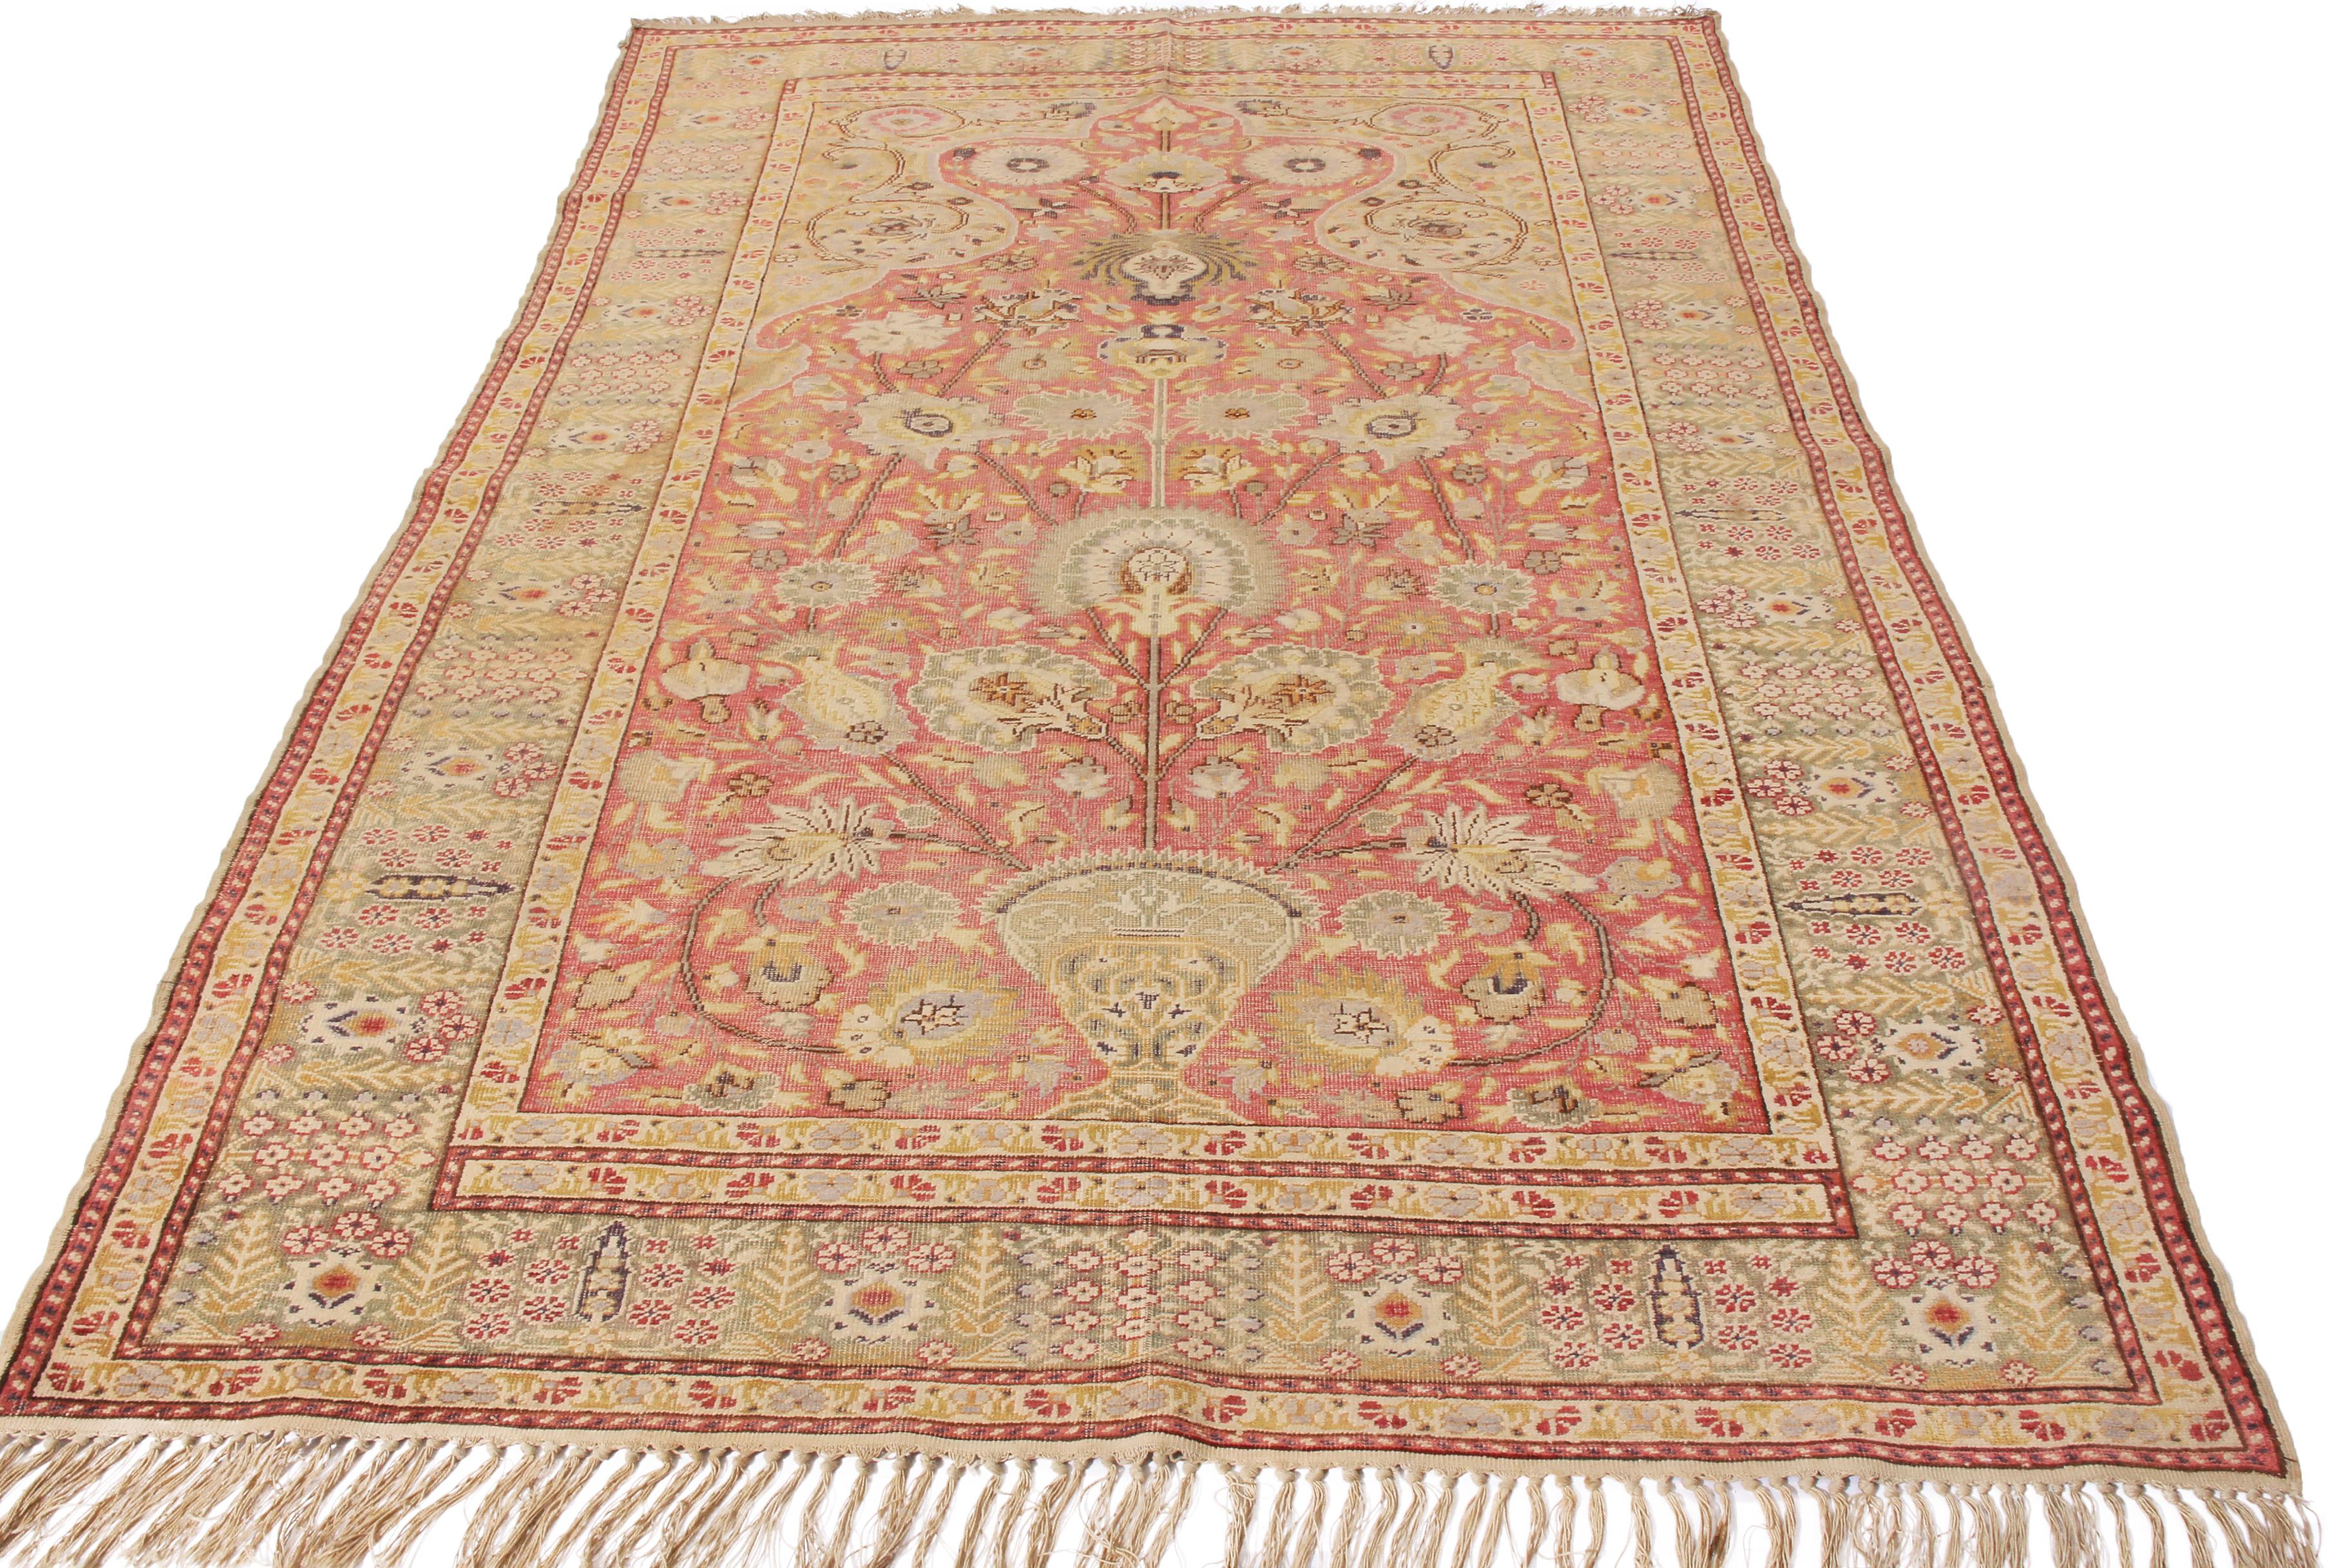 Originating from Turkey in 1890, this hand knotted antique Gordes wool rug marries uncommon tea green and pink colorways with a unique employment of the traditional tree of life motif. Surrounding a finely woven curvilinear field design with sole